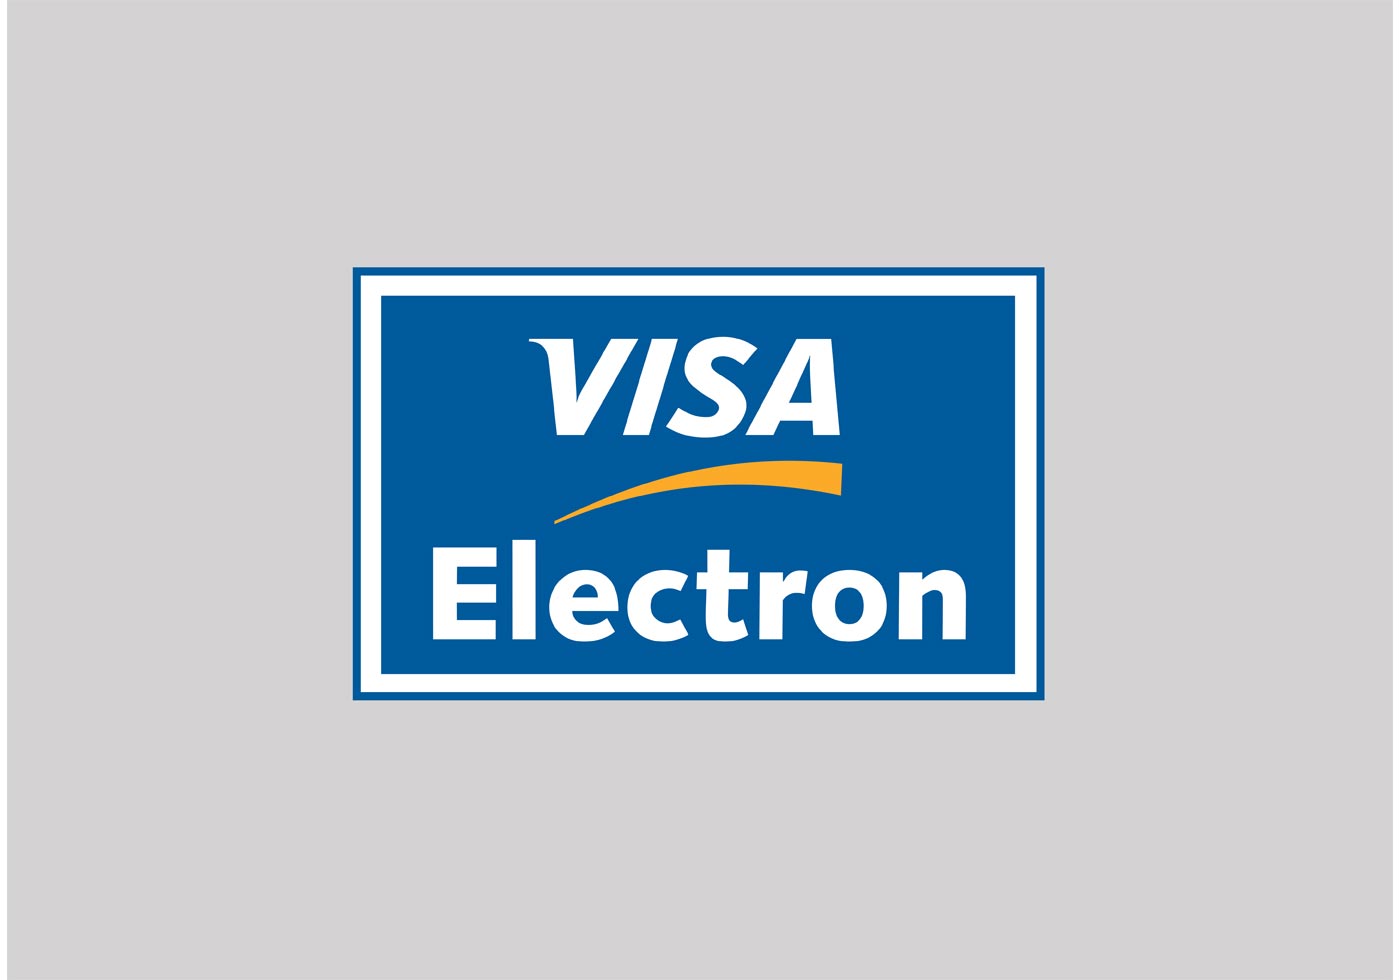 What Is Visa Electron